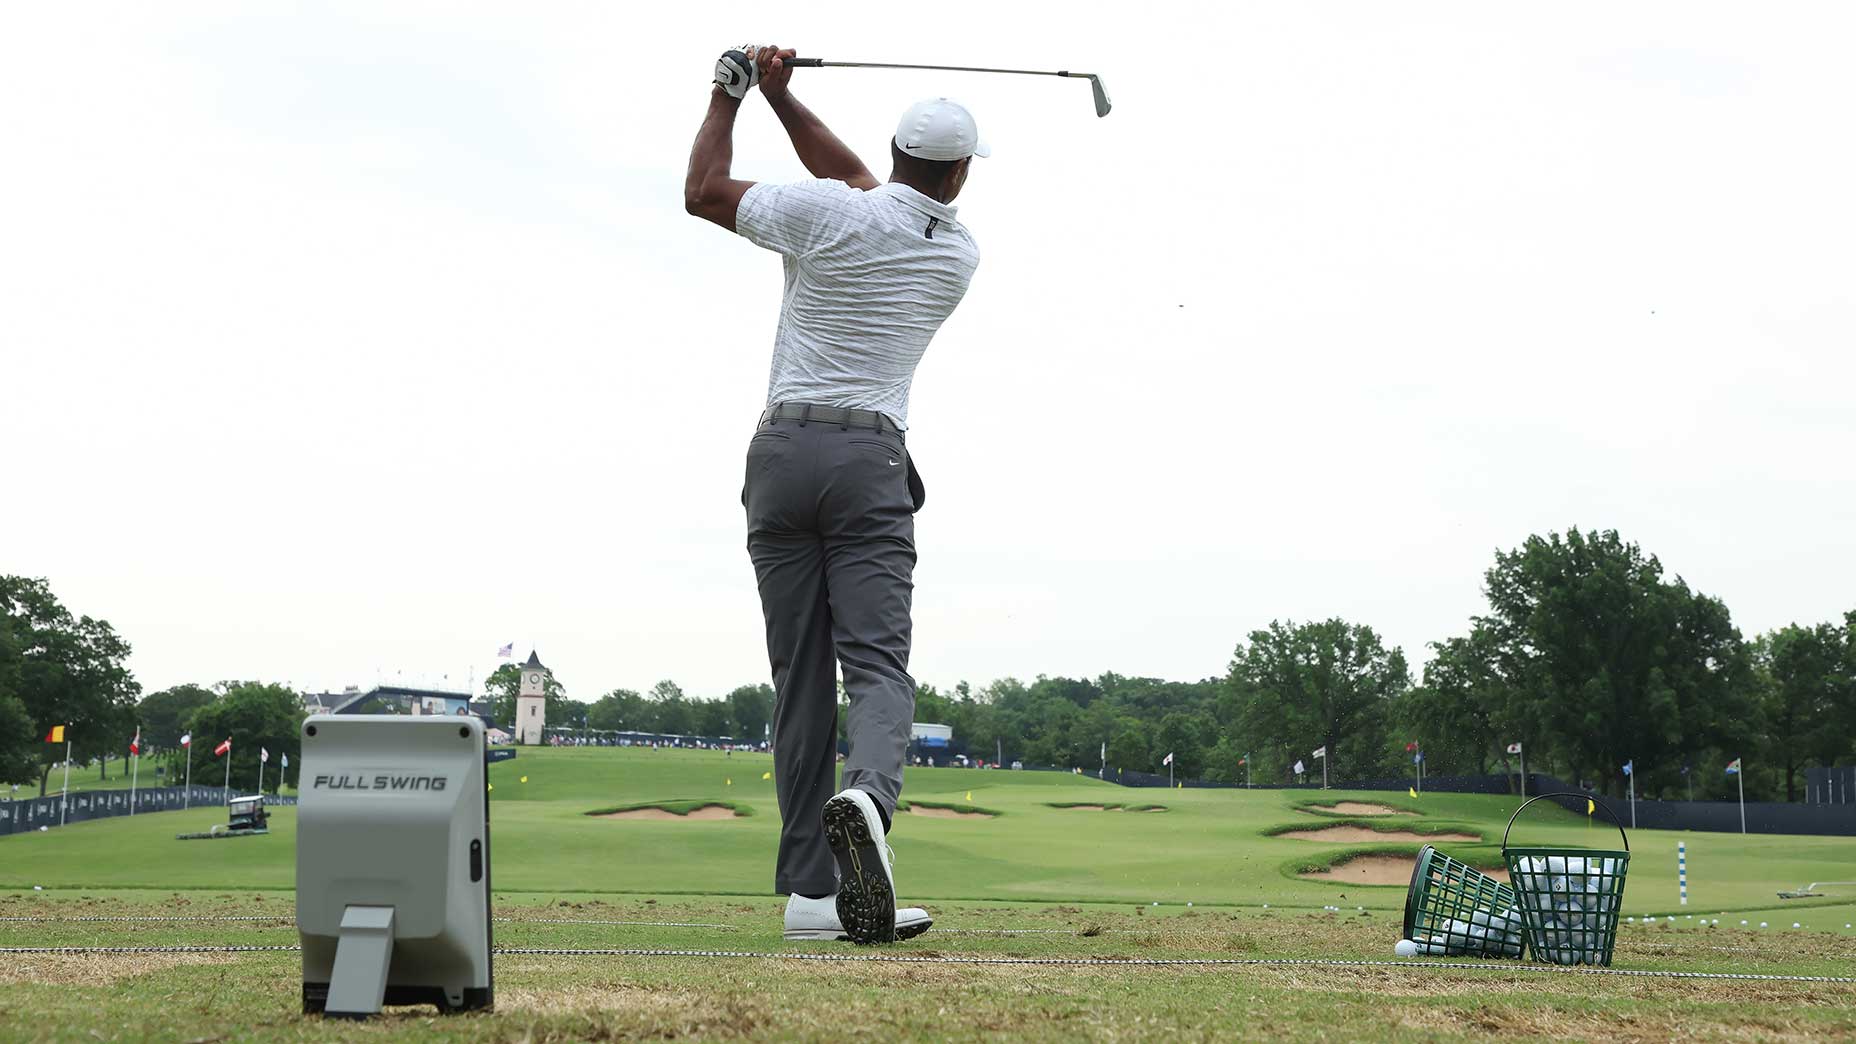 Tiger Woods hits a shot on the range on Wednesday.